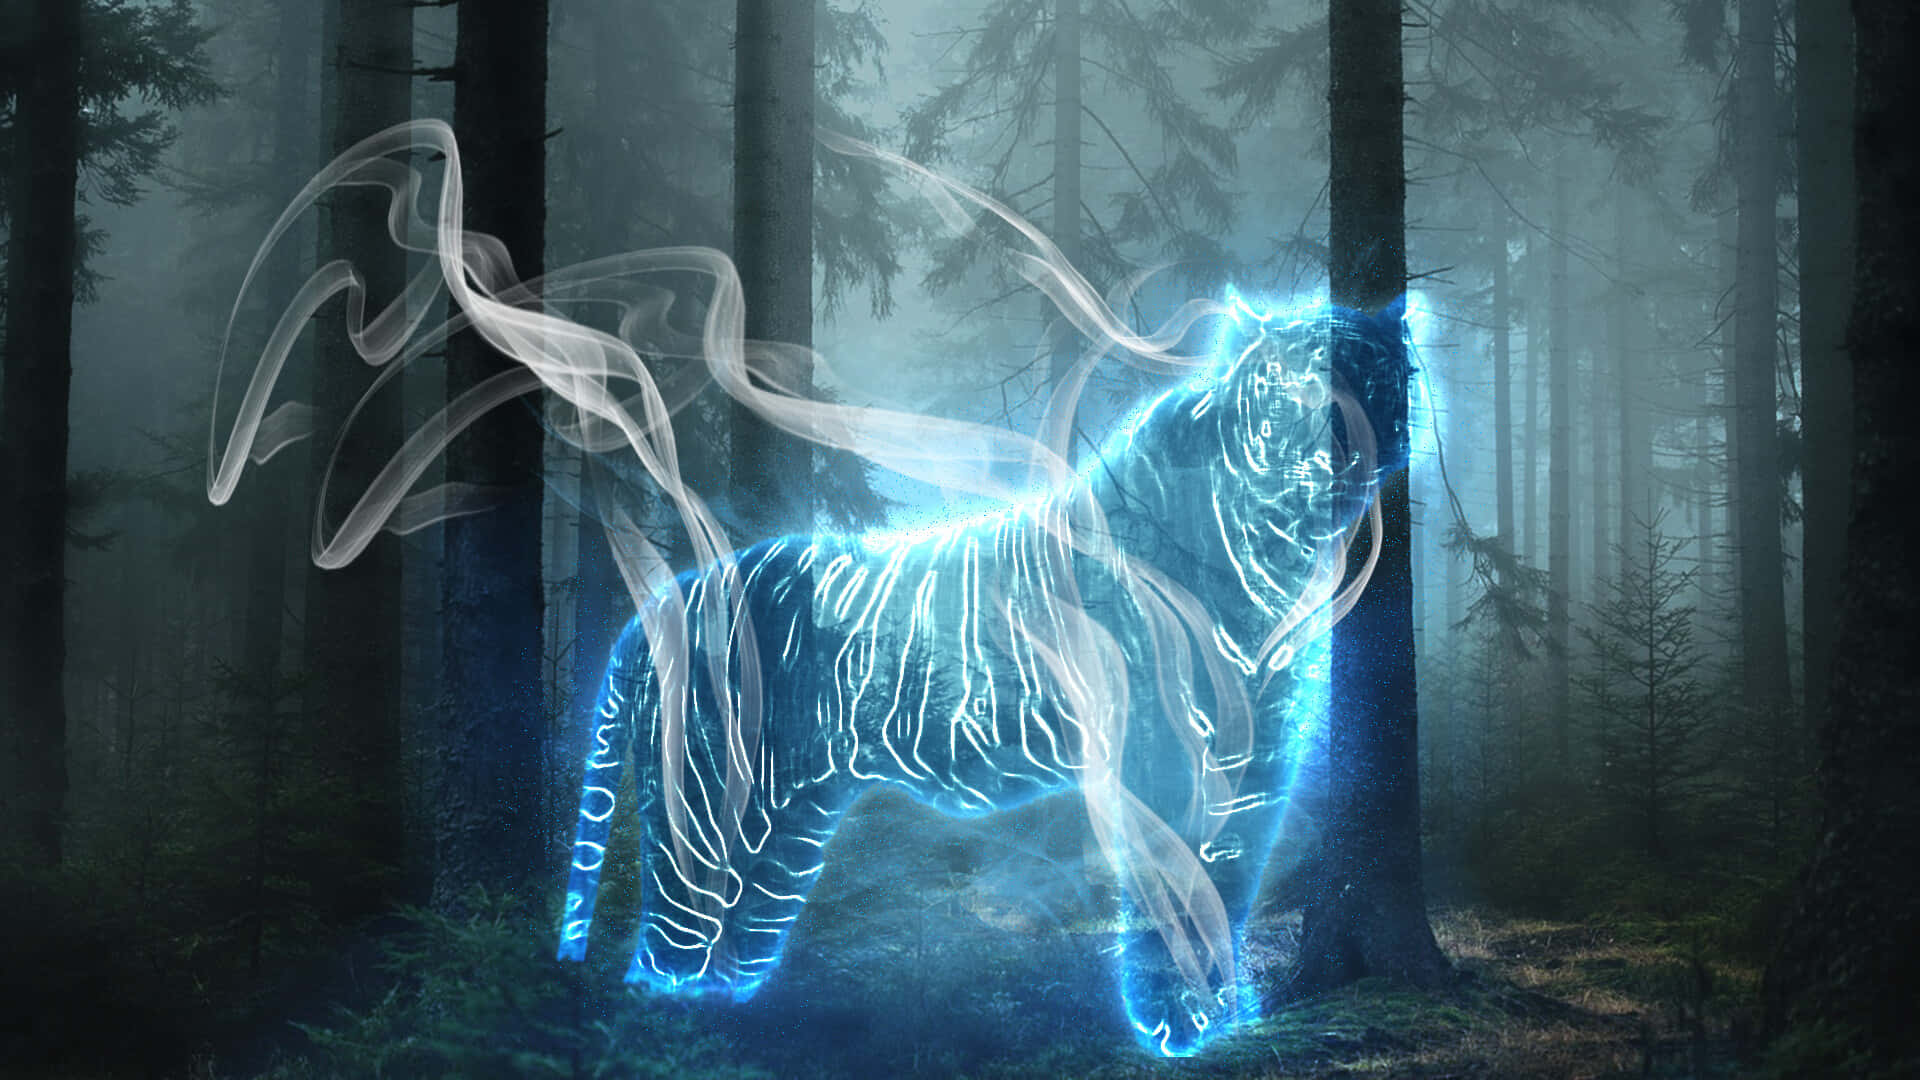 Caption: Mystical Patronus in a Magical Forest Wallpaper